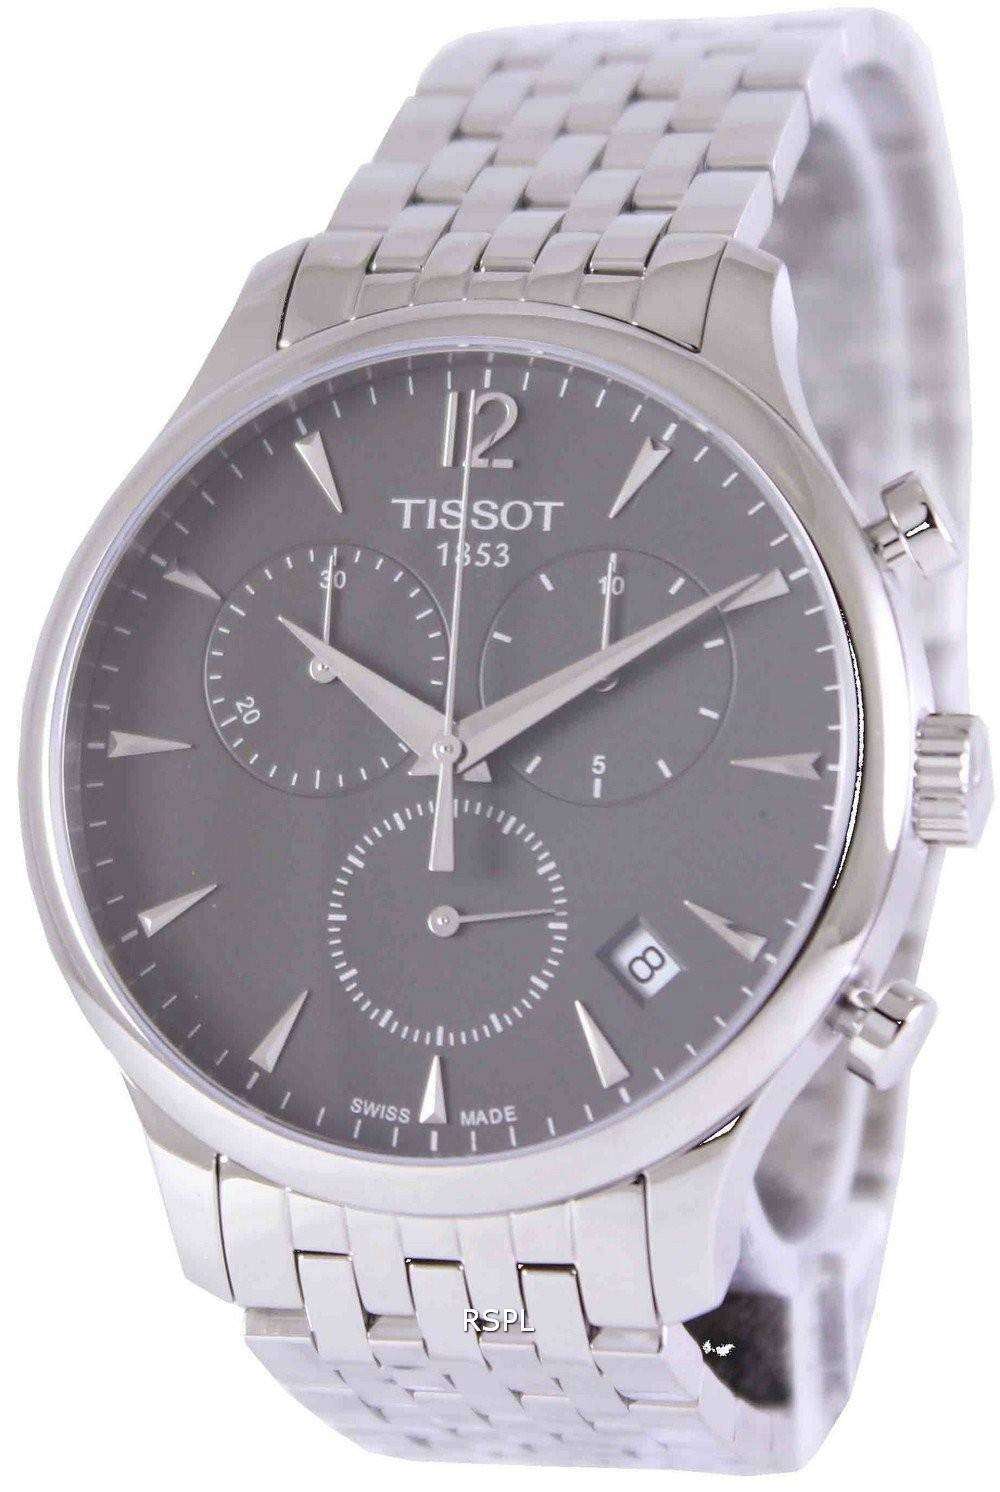 Tissot TClassic Tradition Chronograph T063.617.11.067.00 Mens Watch CityWatches.co.uk